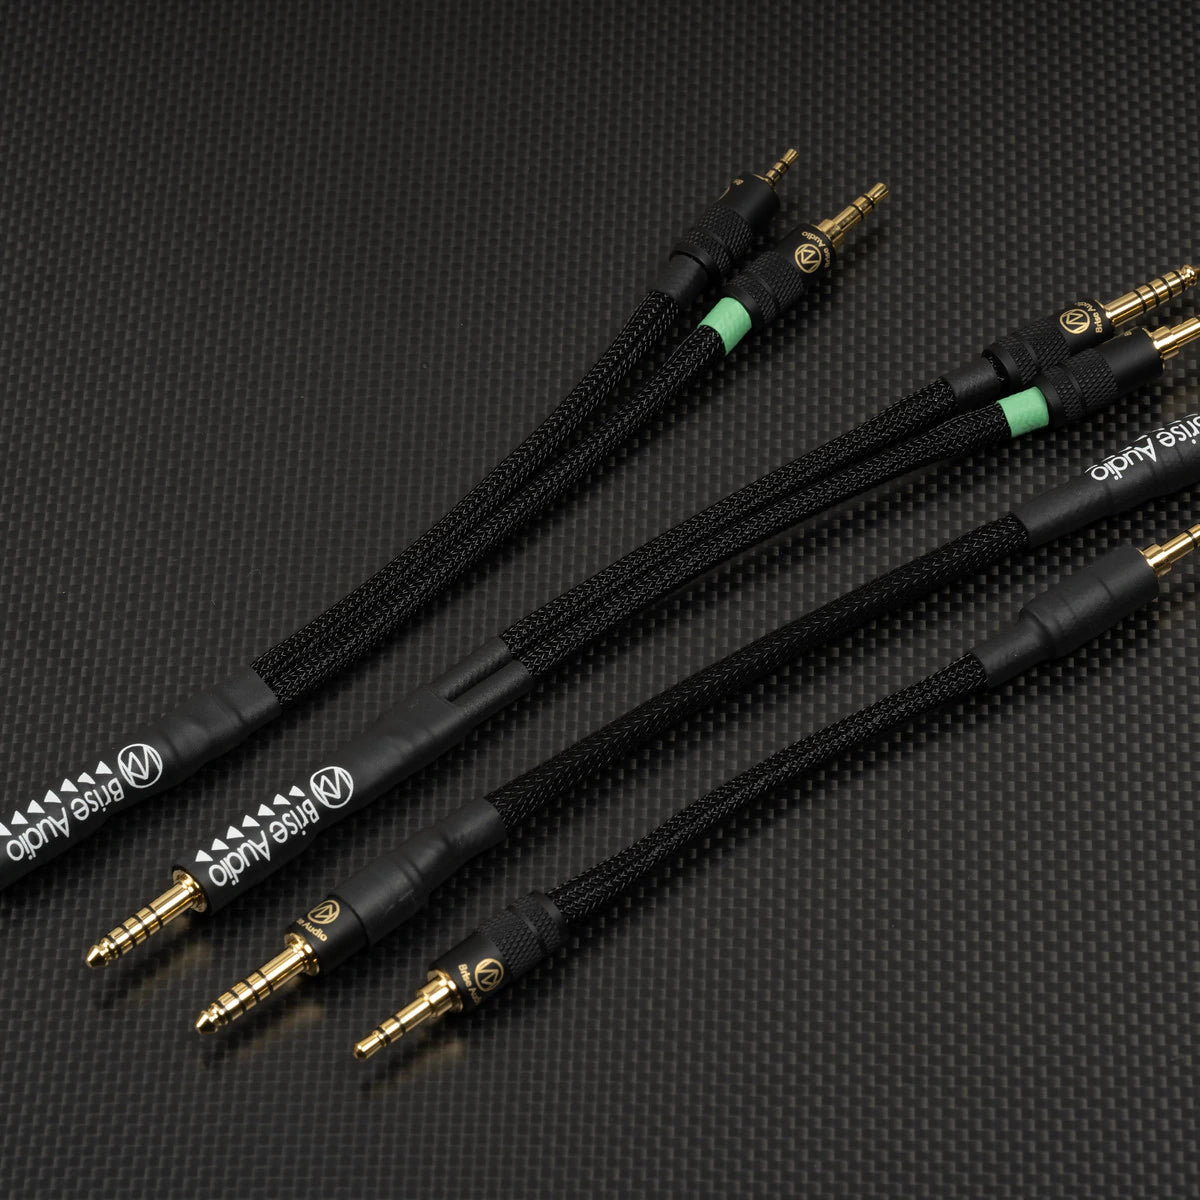 BriseAudio will release a total of four new YATONO-MINI LE mini-mini cables (line cables for portable audio) for balanced connections on February 12, 2021.